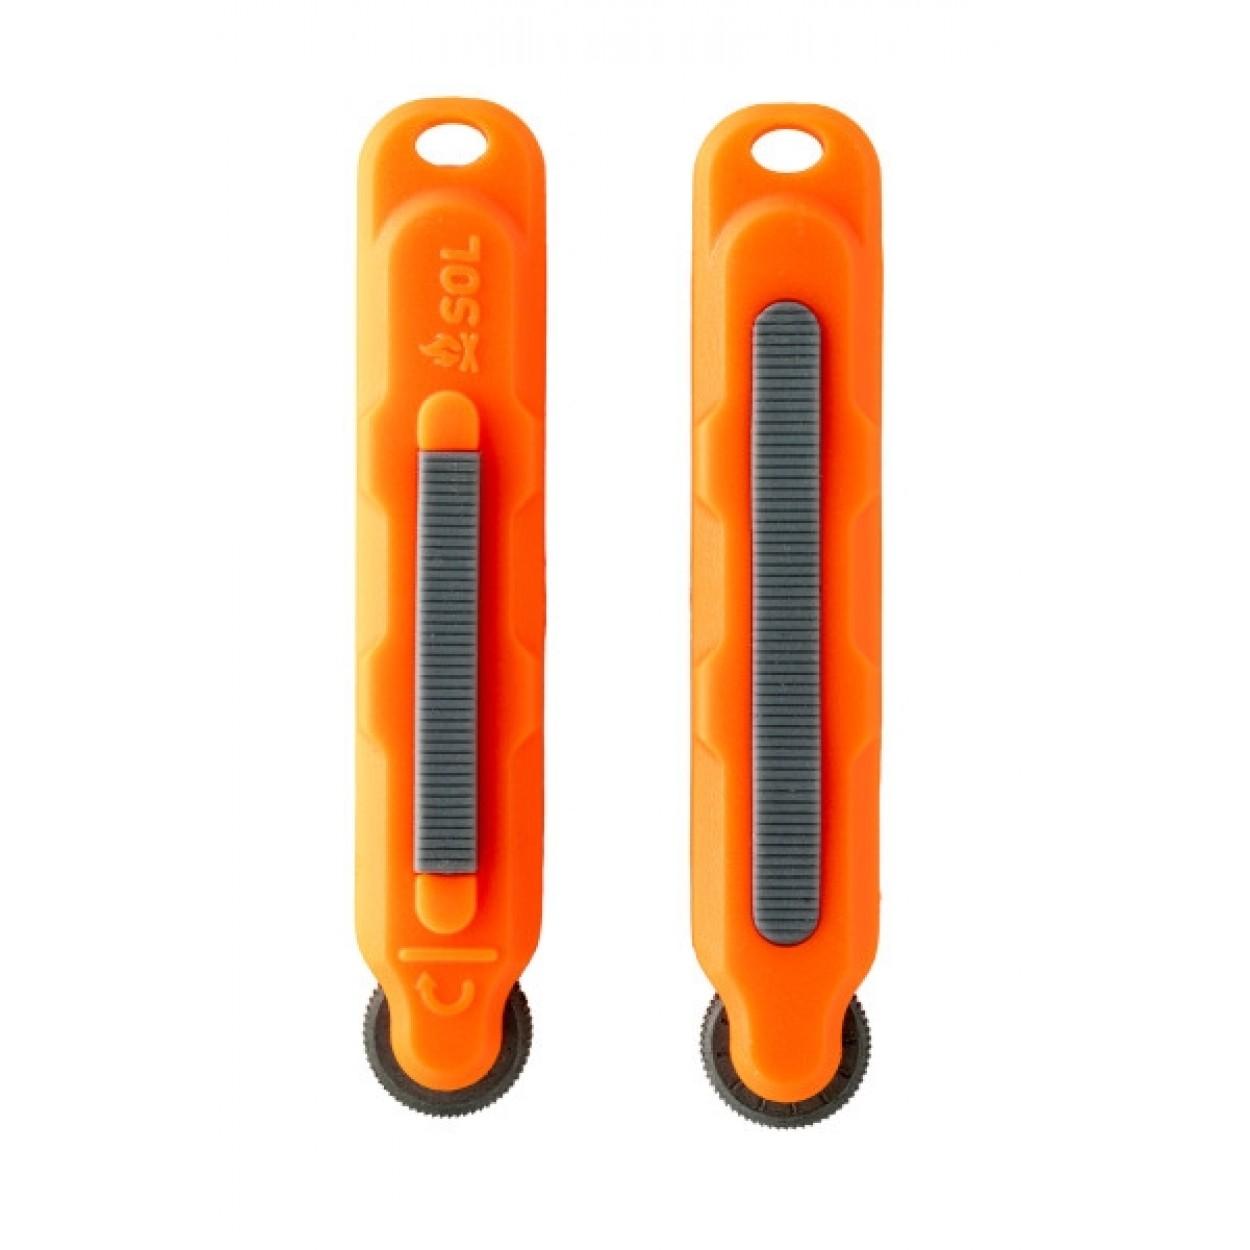 ARB SOL FIRE LITE MICRO SPARKER 2 PACK